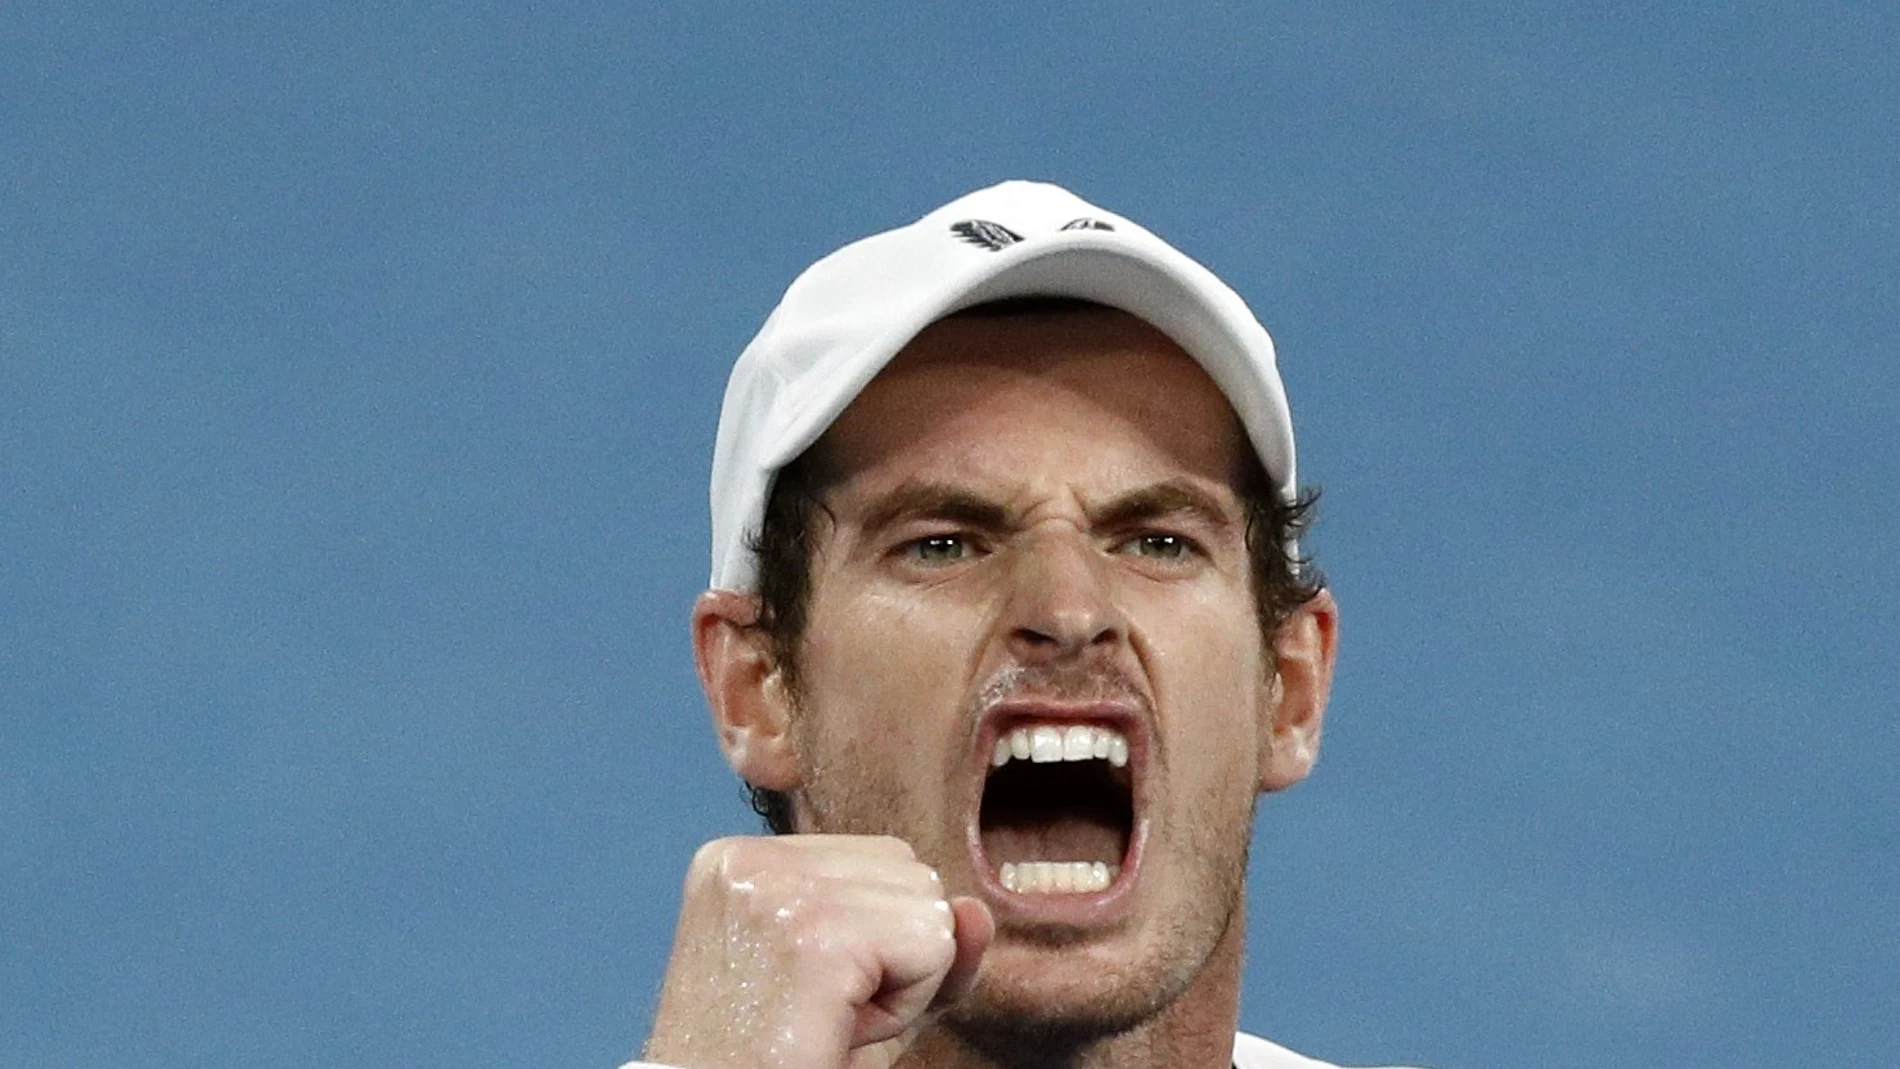 Tennis - Australian Open - First Round - Melbourne Arena, Melbourne, Australia, January 14, 2019. Britain's Andy Murray reacts during the match against Spain's Roberto Bautista Agut. REUTERS/Edgar Su